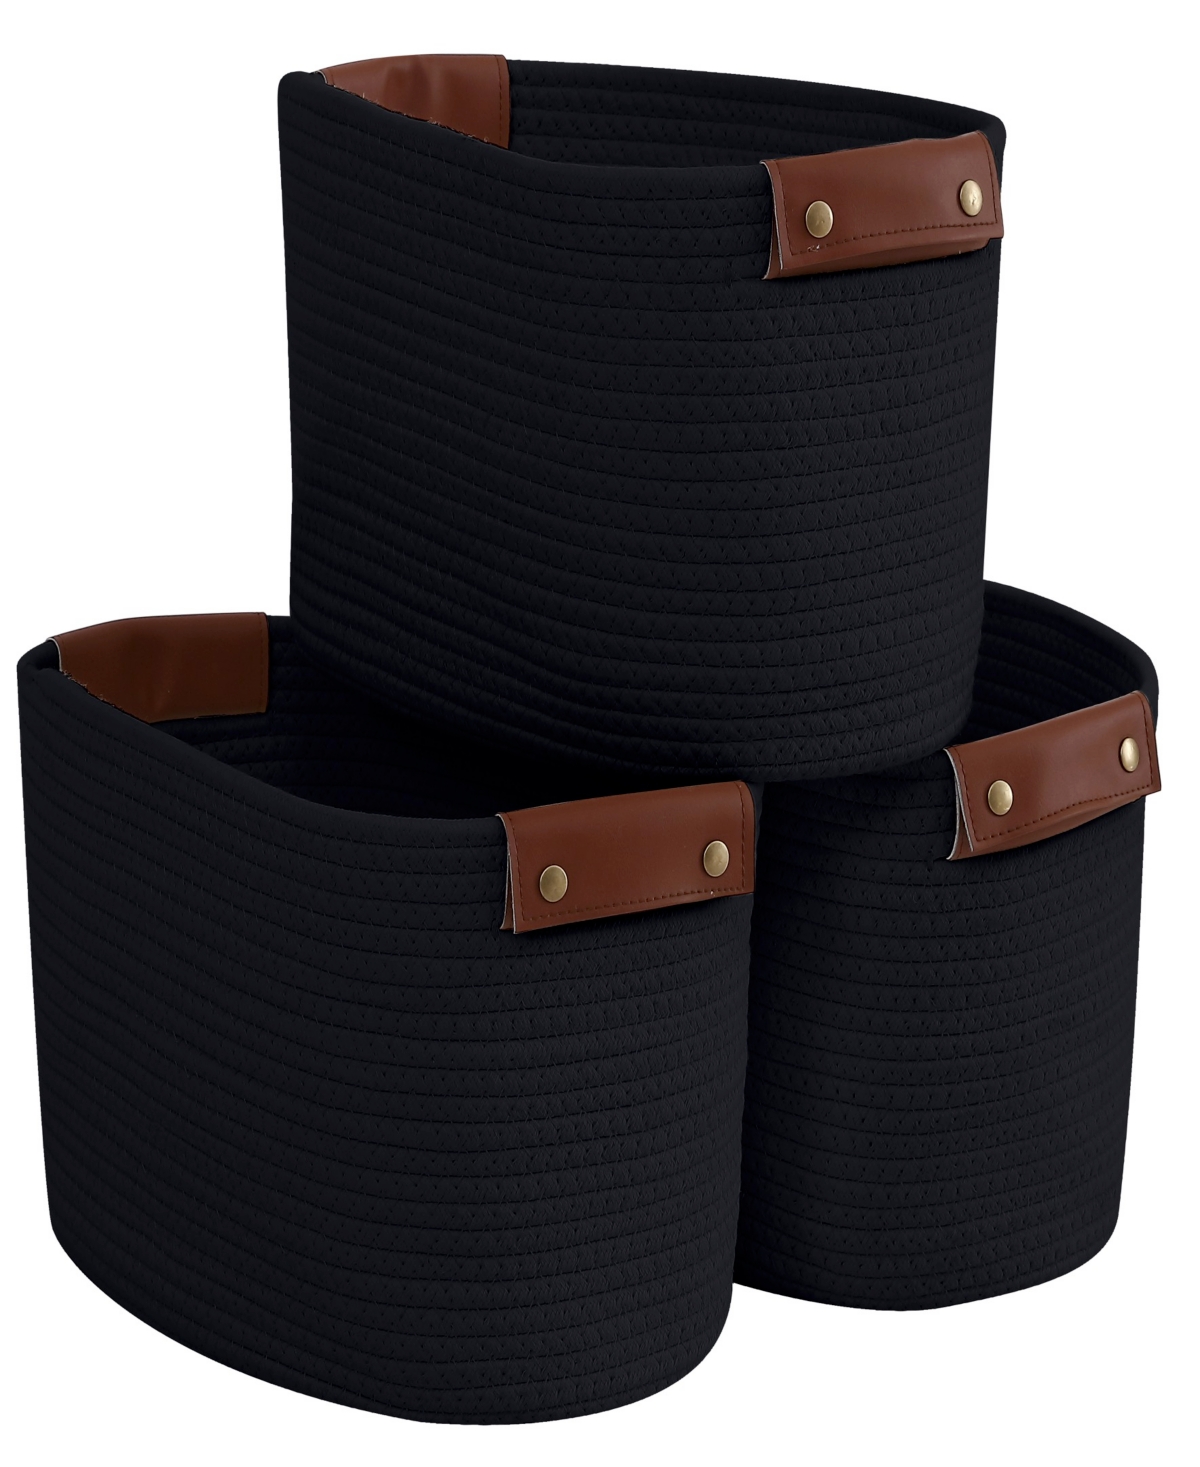 Ornavo Home 3 Pack Woven Cotton Rope Shelf Storage Basket With Leather Handles In Black